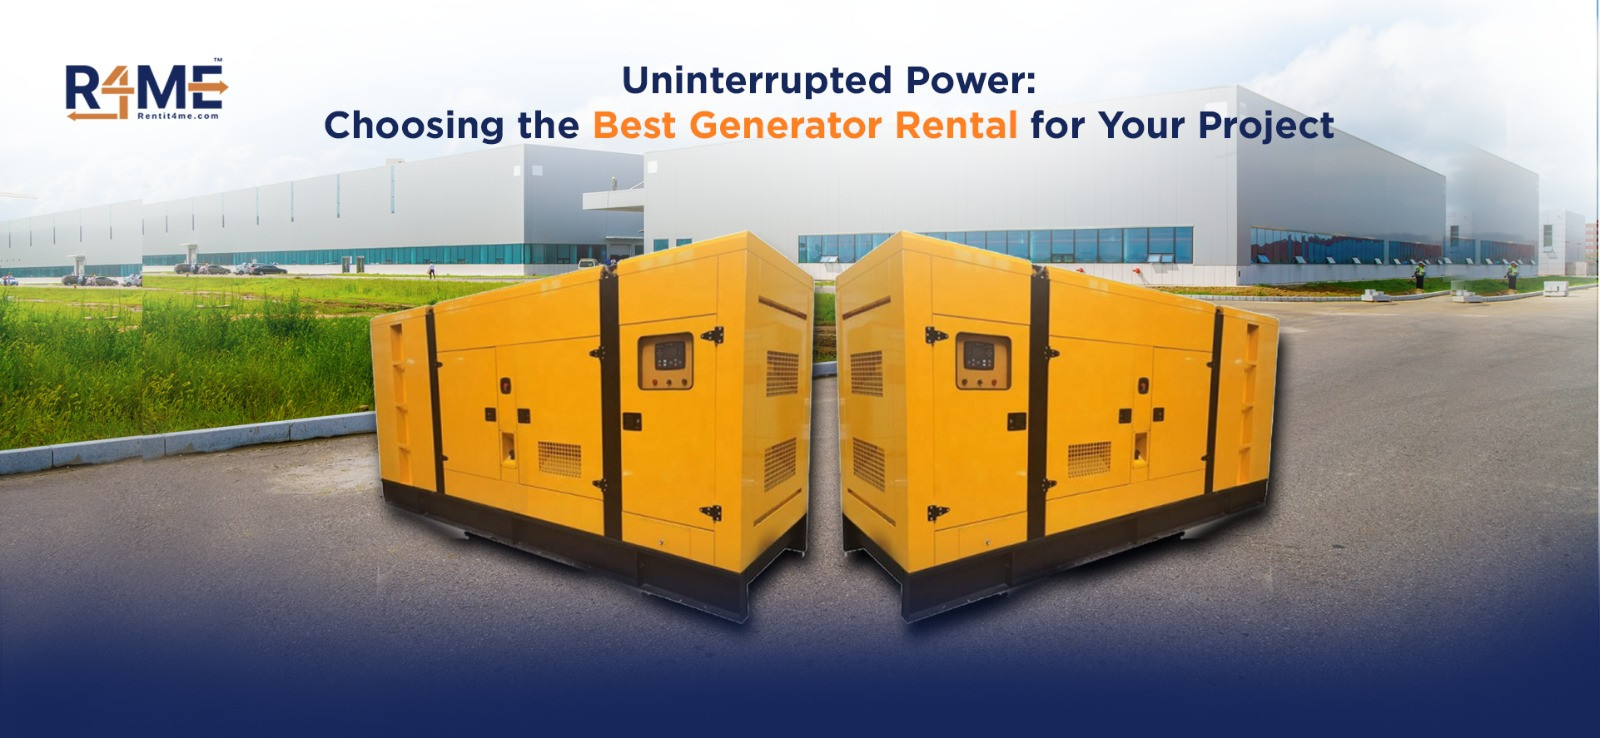 Uninterrupted Power: Choosing the Best Generator Rental for Your Project